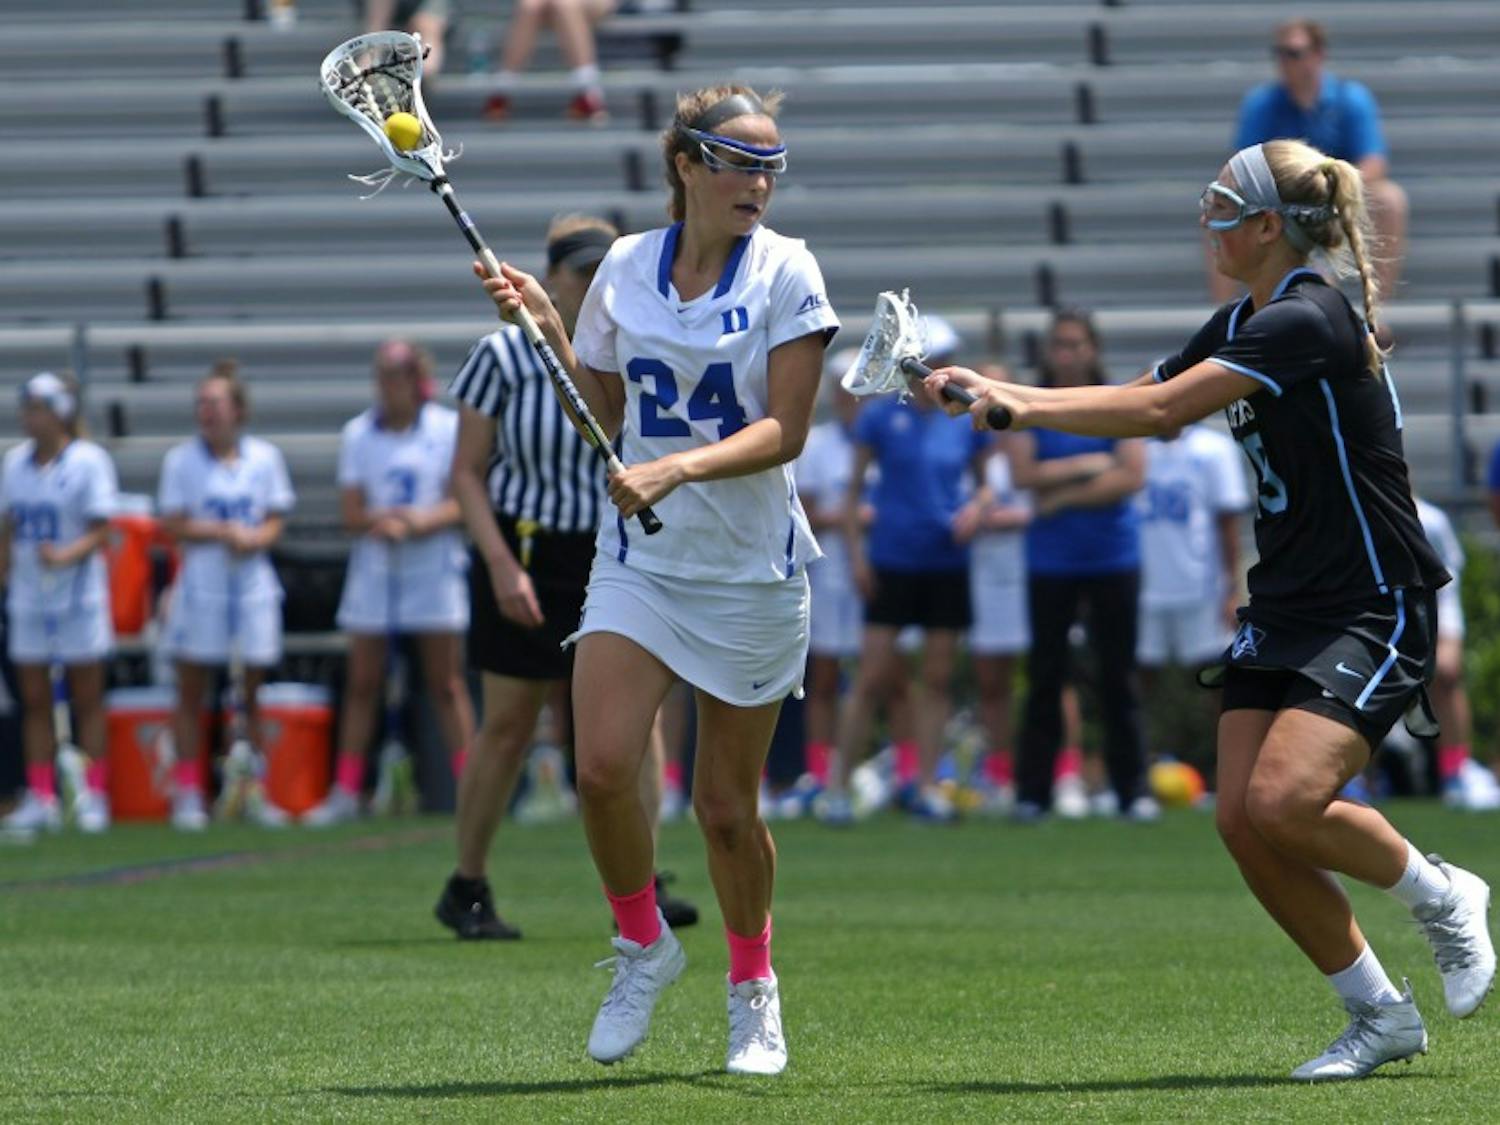 Senior Katie Trees and the Blue Devils could not complete the comeback Sunday against Johns Hopkins.